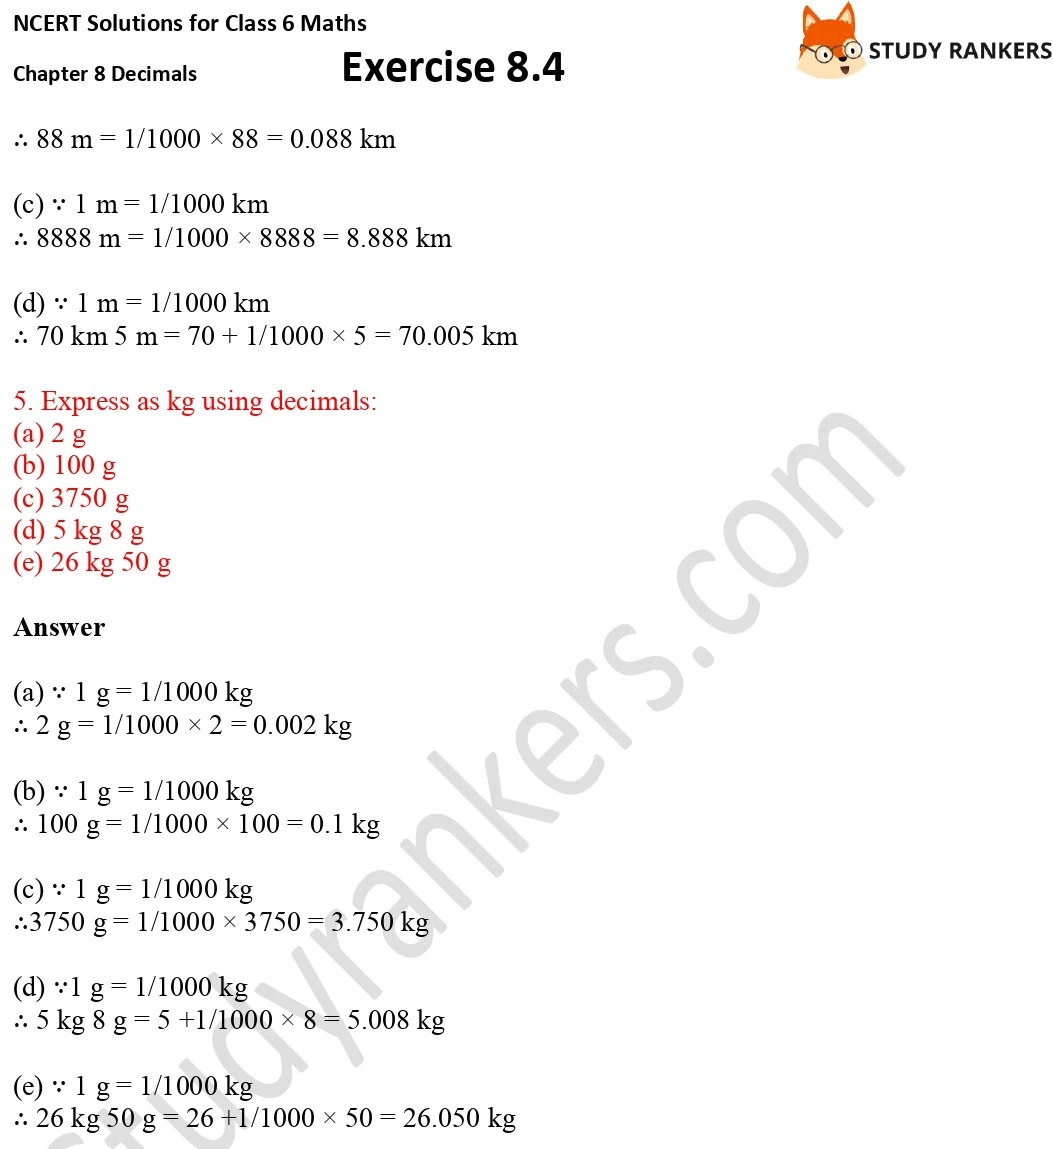 NCERT Solutions for Class 6 Maths Chapter 8 Decimals Exercise 8.4 Part 3